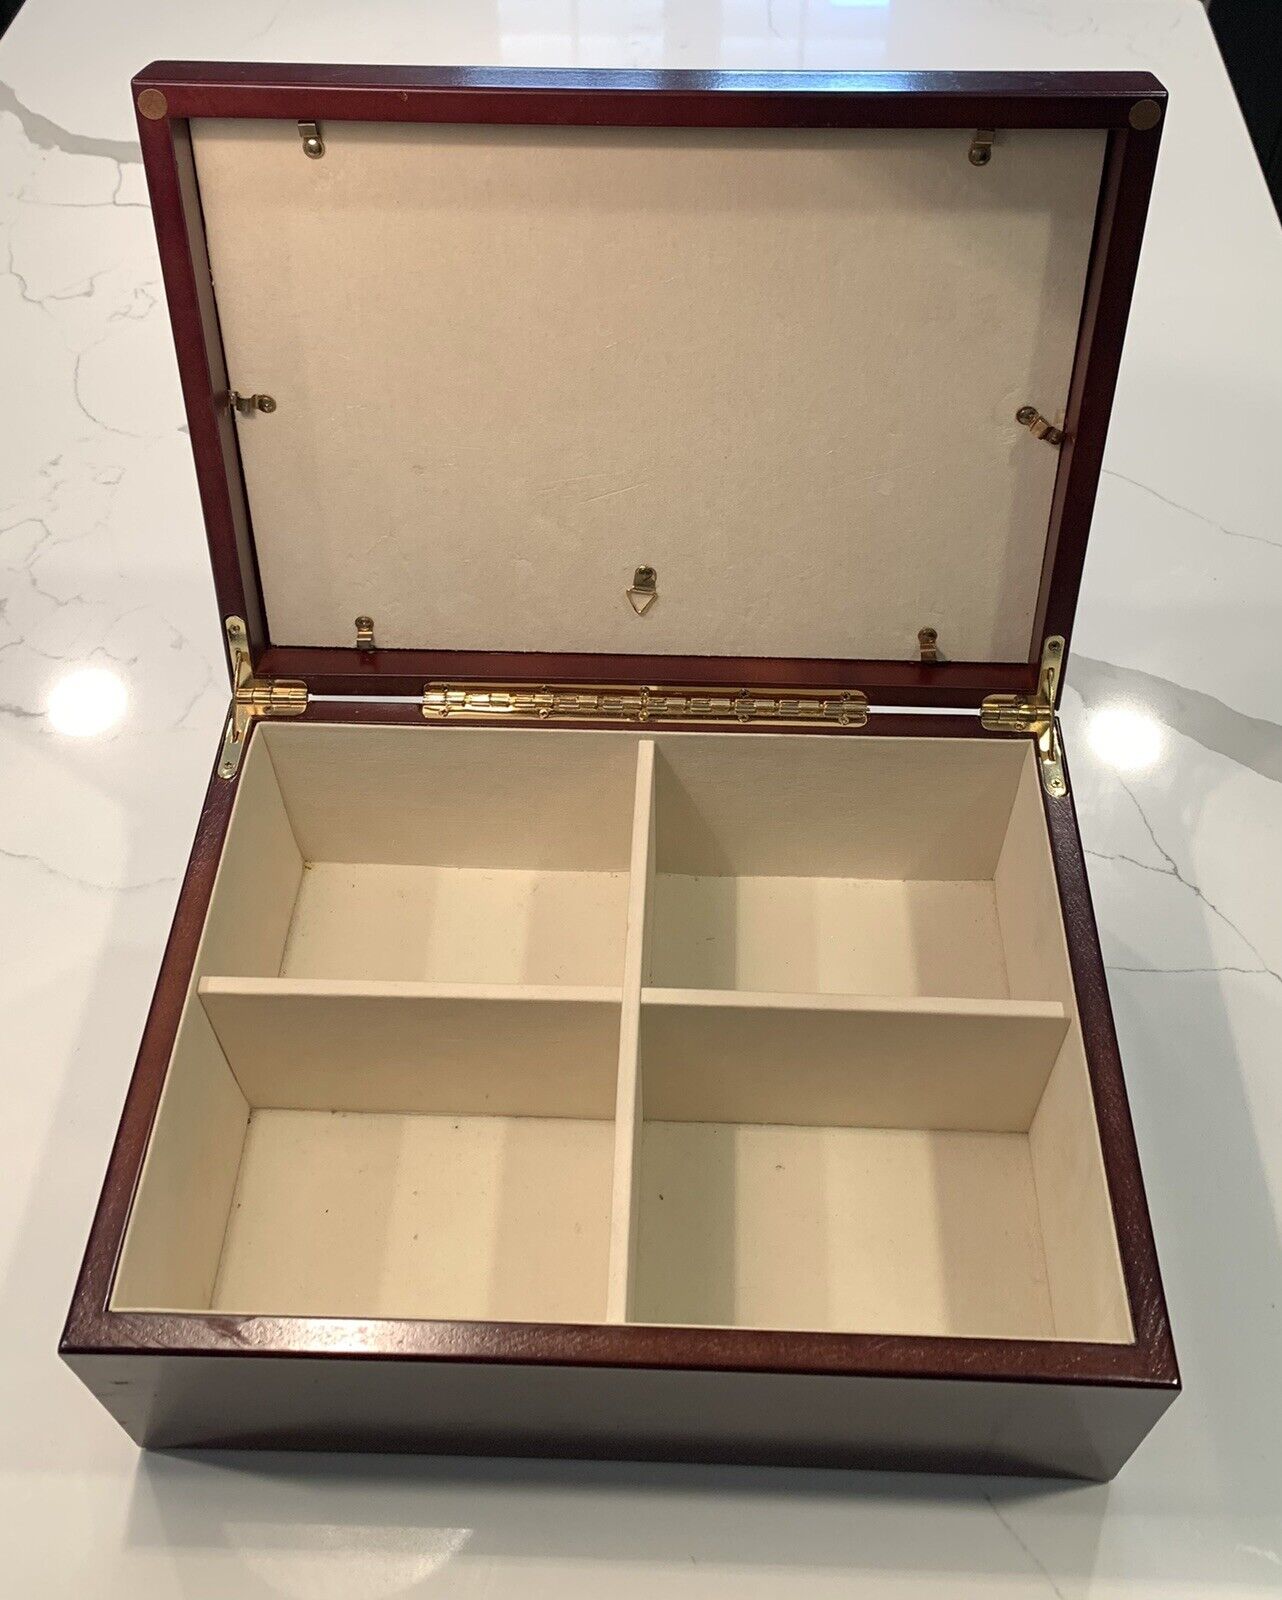 Vintage wood memory box 4 storage Compartments Color Cherry Wood 13.5 In